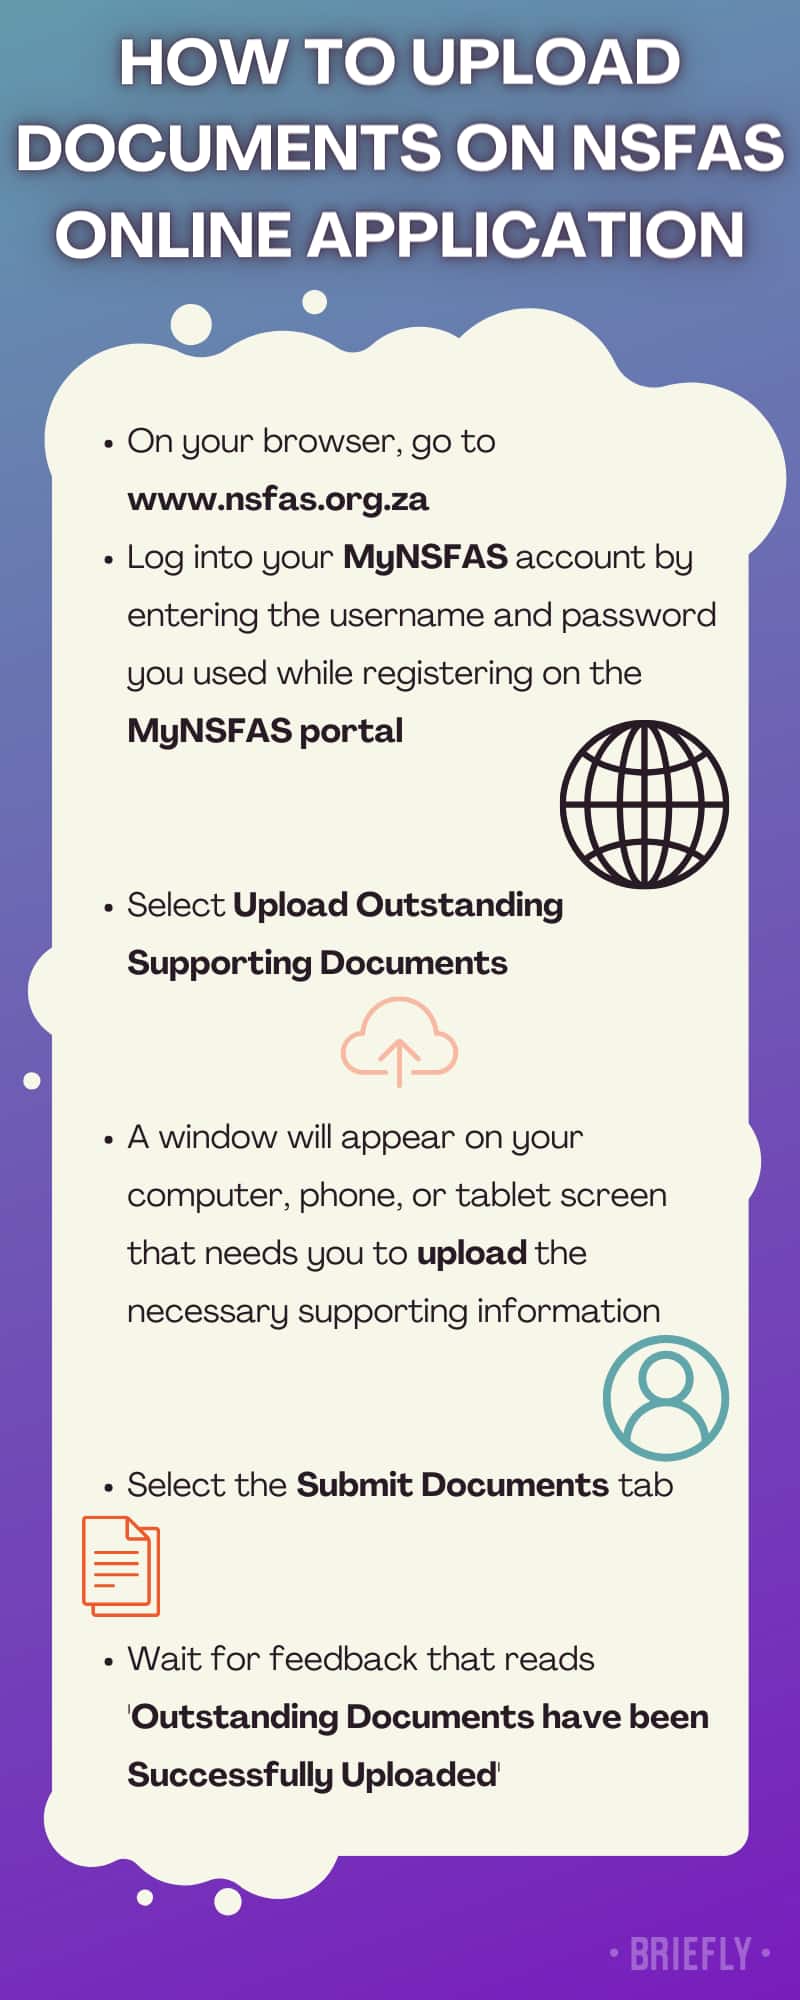 How to upload documents on NSFAS